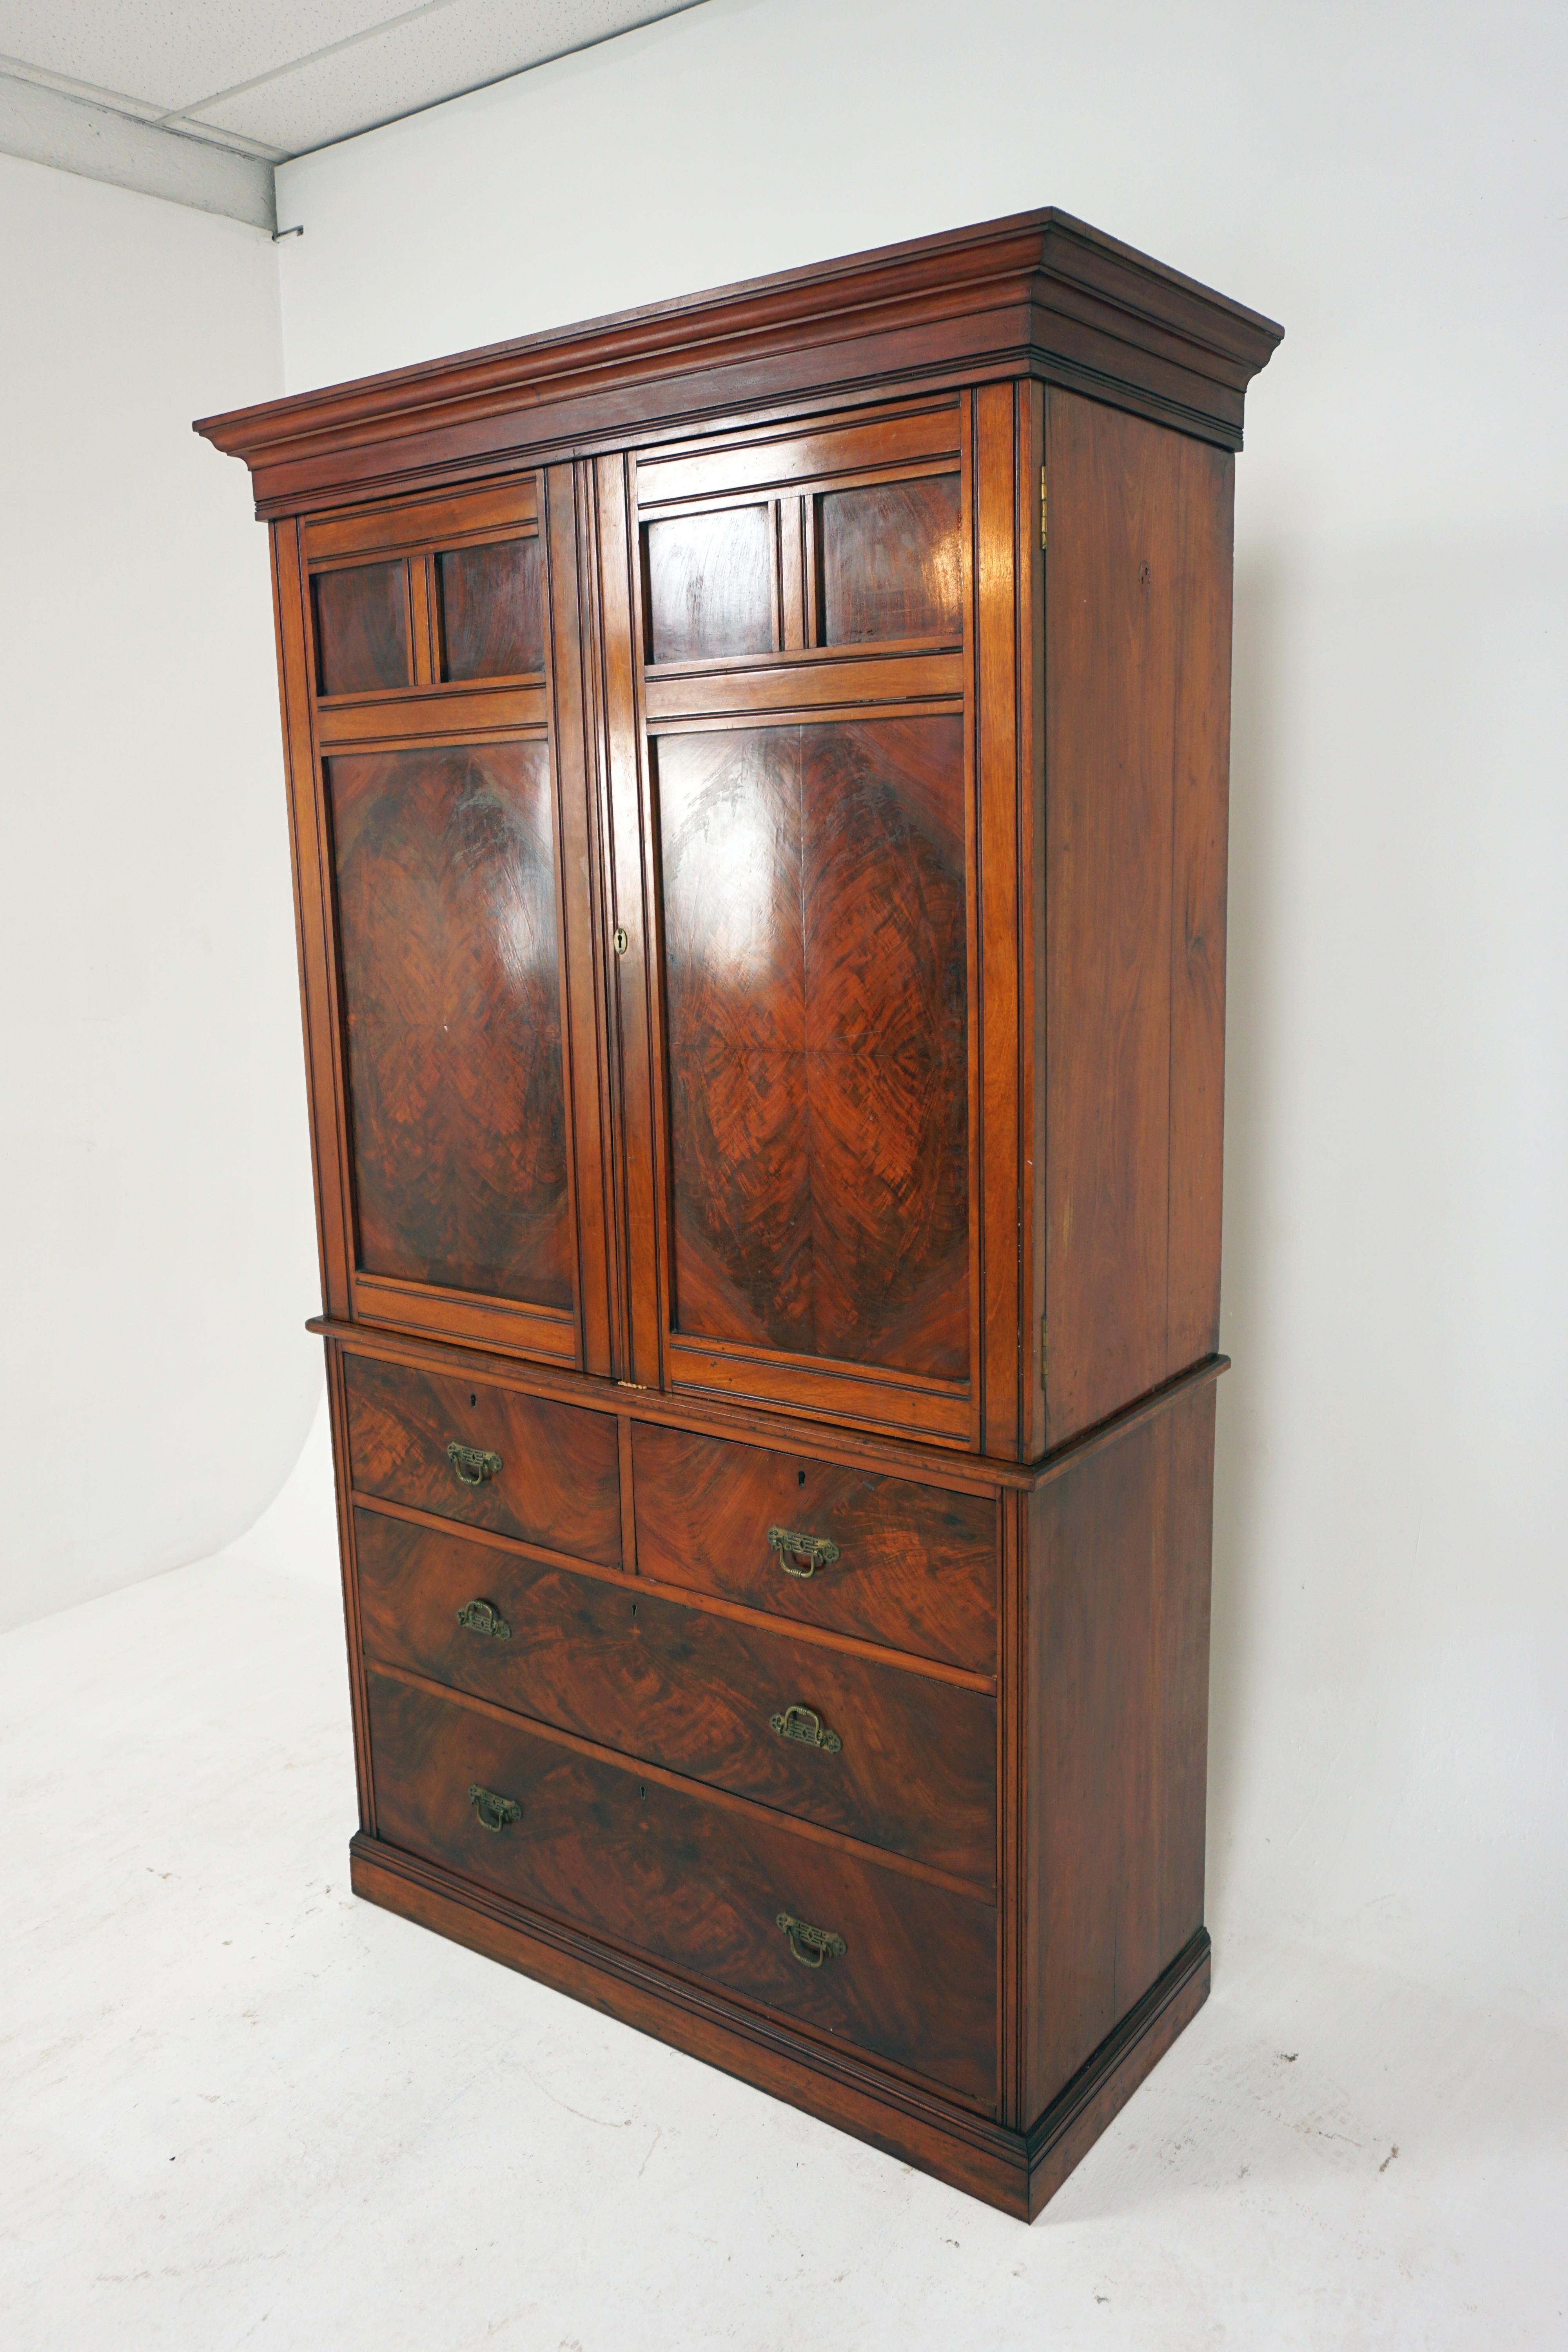 Antique Victorian walnut linen press, dresser, closet, Scotland 1880, H228

Scotland 1880
Solid walnut
Original finish
Flared cornice on top
Pair of paneled doors open to reveal hanging cupboard on right side, cupboard with shelves on the left
Base